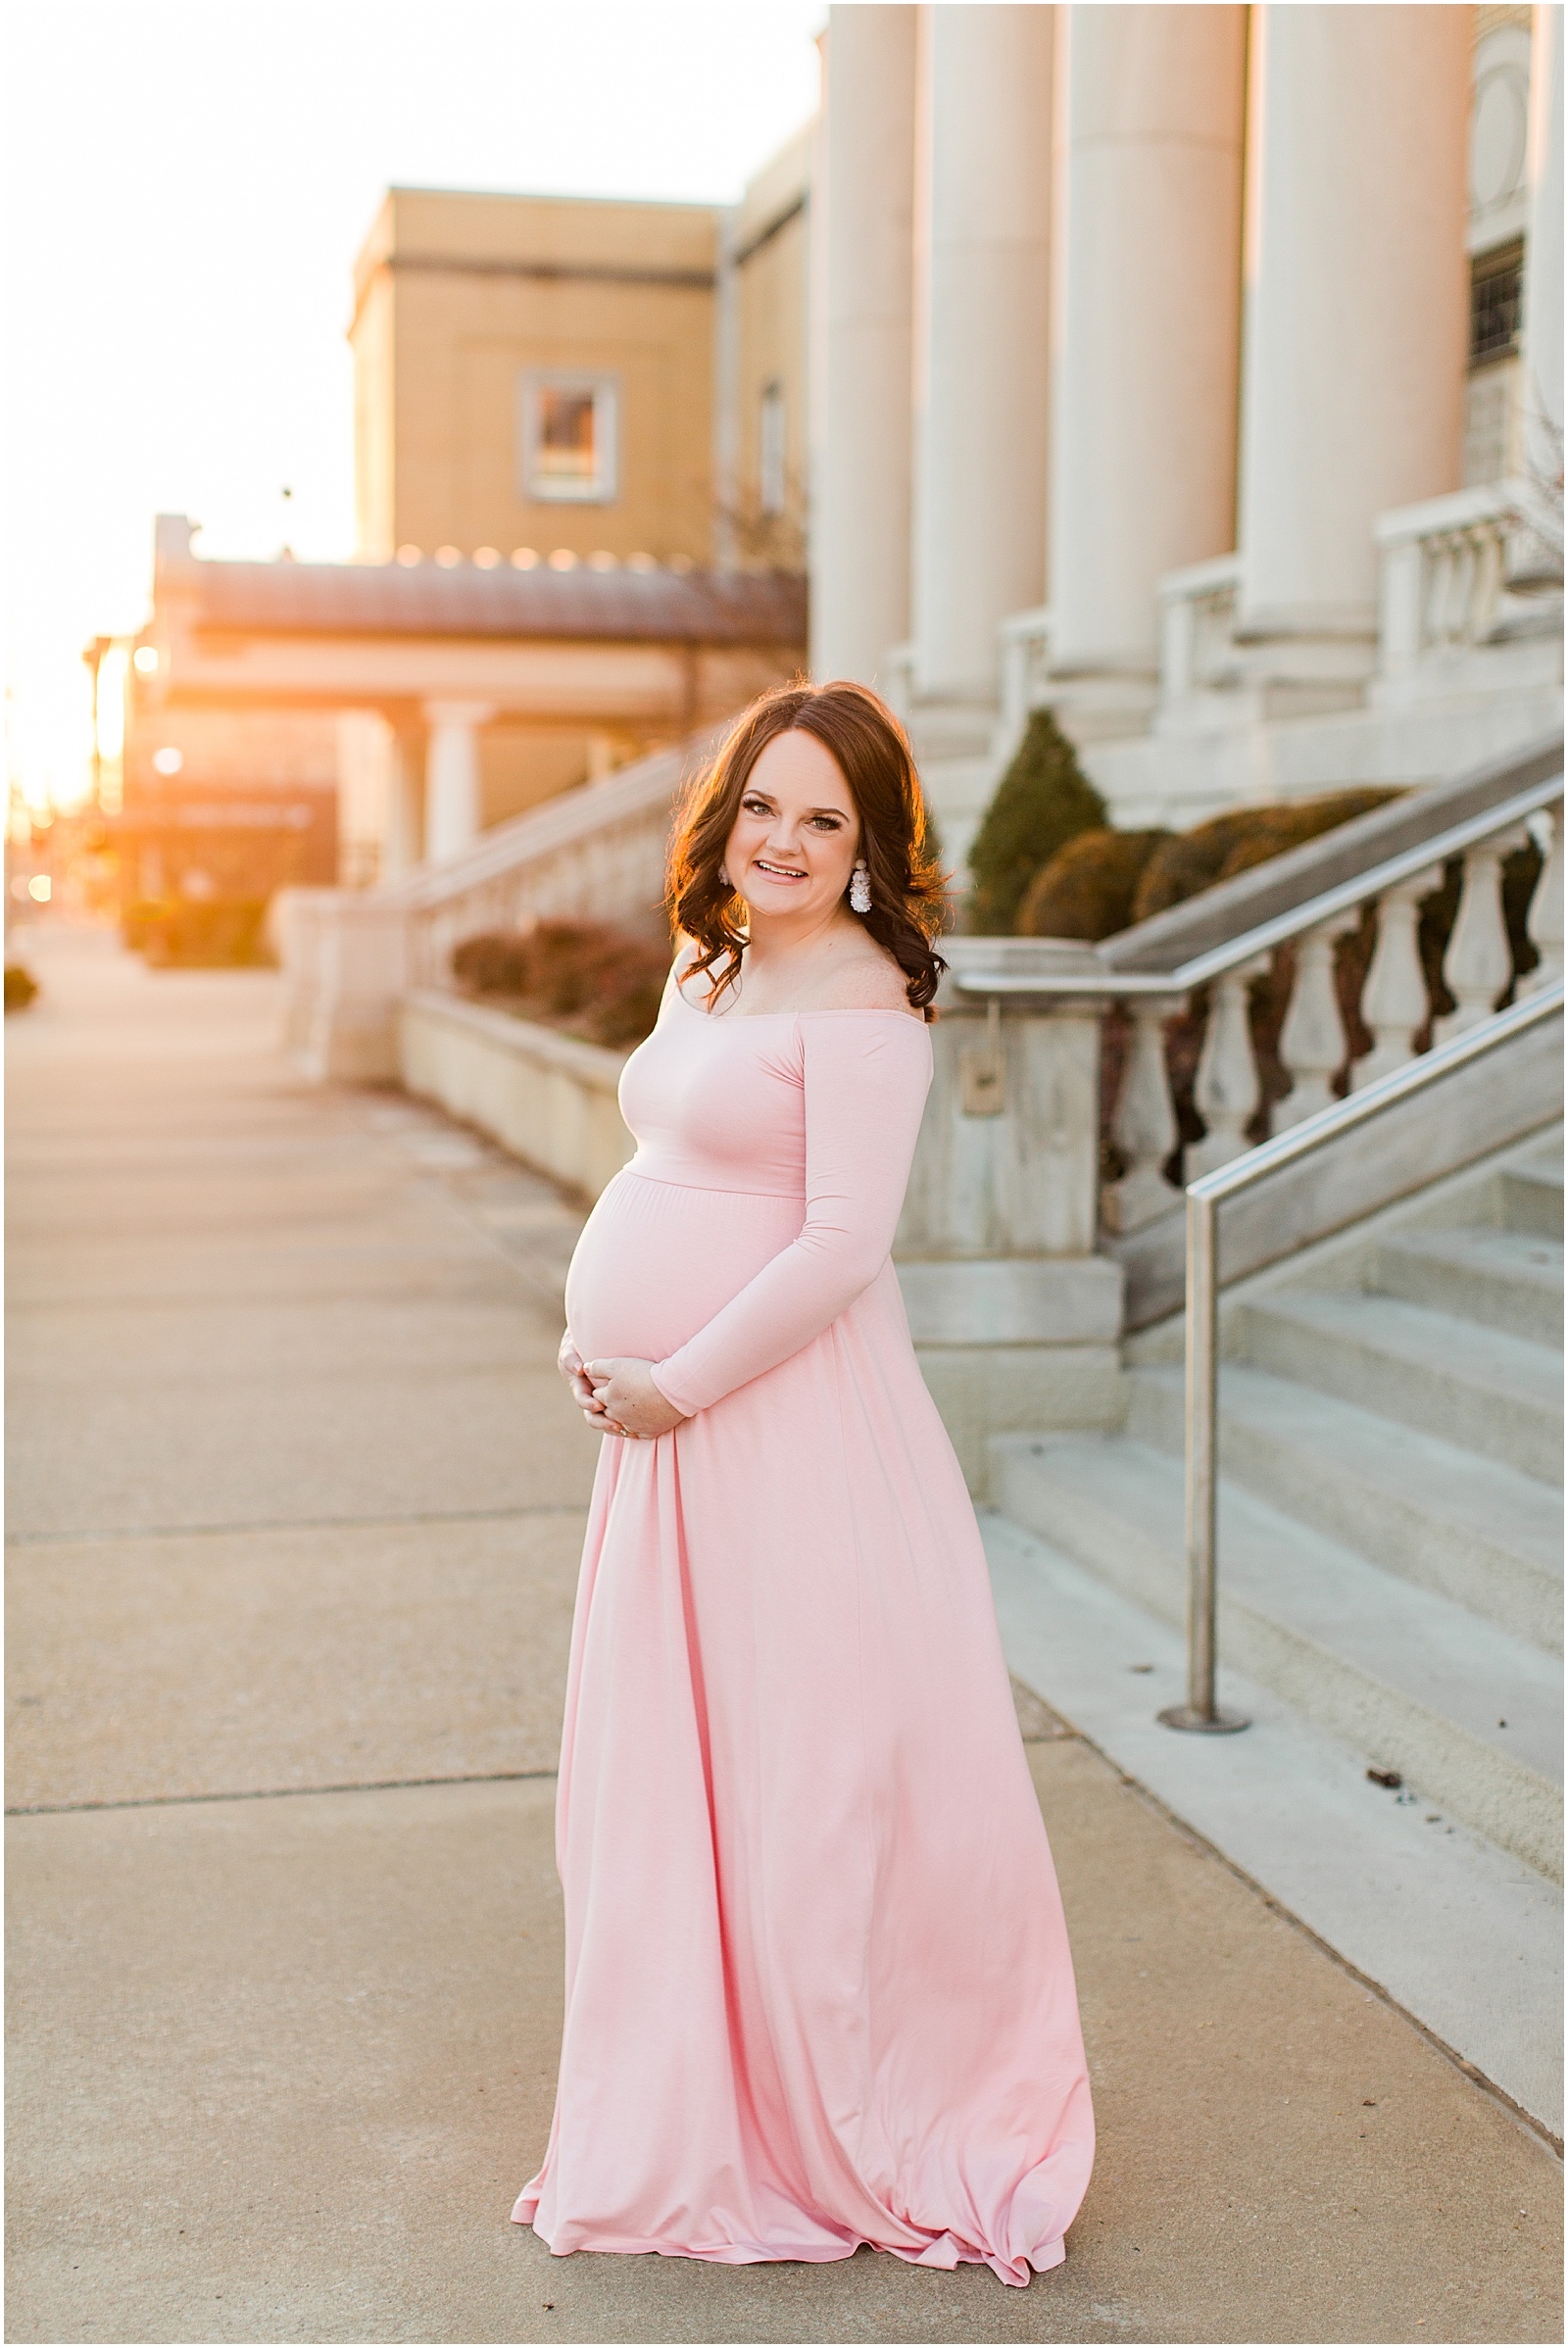 A Downtown Owensboro Maternity Session | Kayla and Grant Evansville Indiana Wedding Photographers-0012.jpg